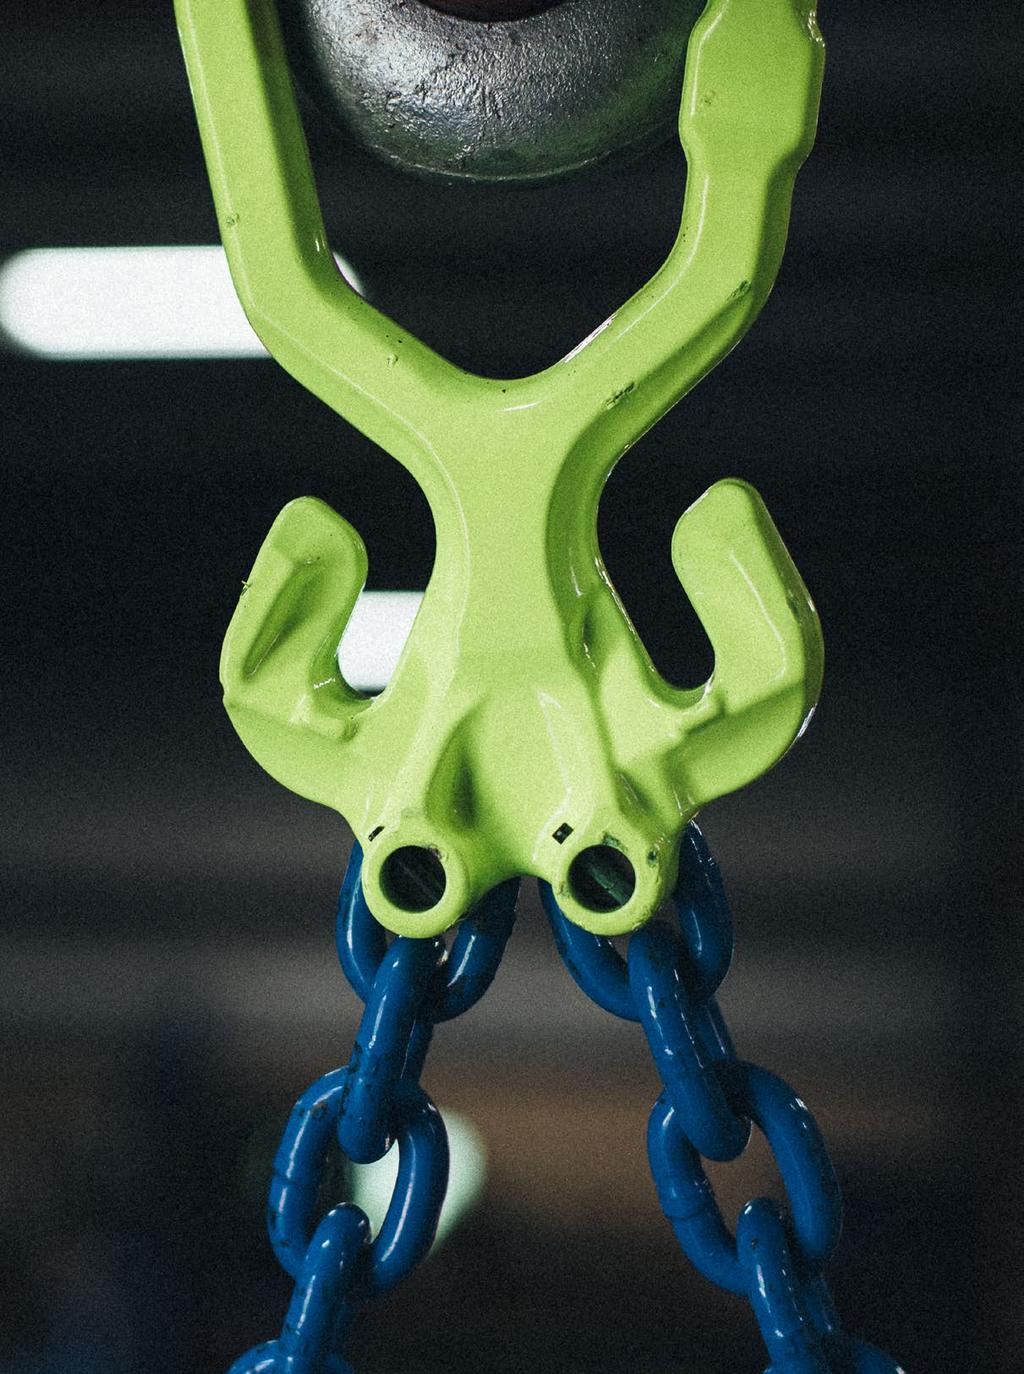 GRABIQ CHAIN SLINGS A Simpler, Lighter, Chain Sling System A totally new way to fabricate chain slings GrabiQ is an exciting new family of alloy chain sling components.